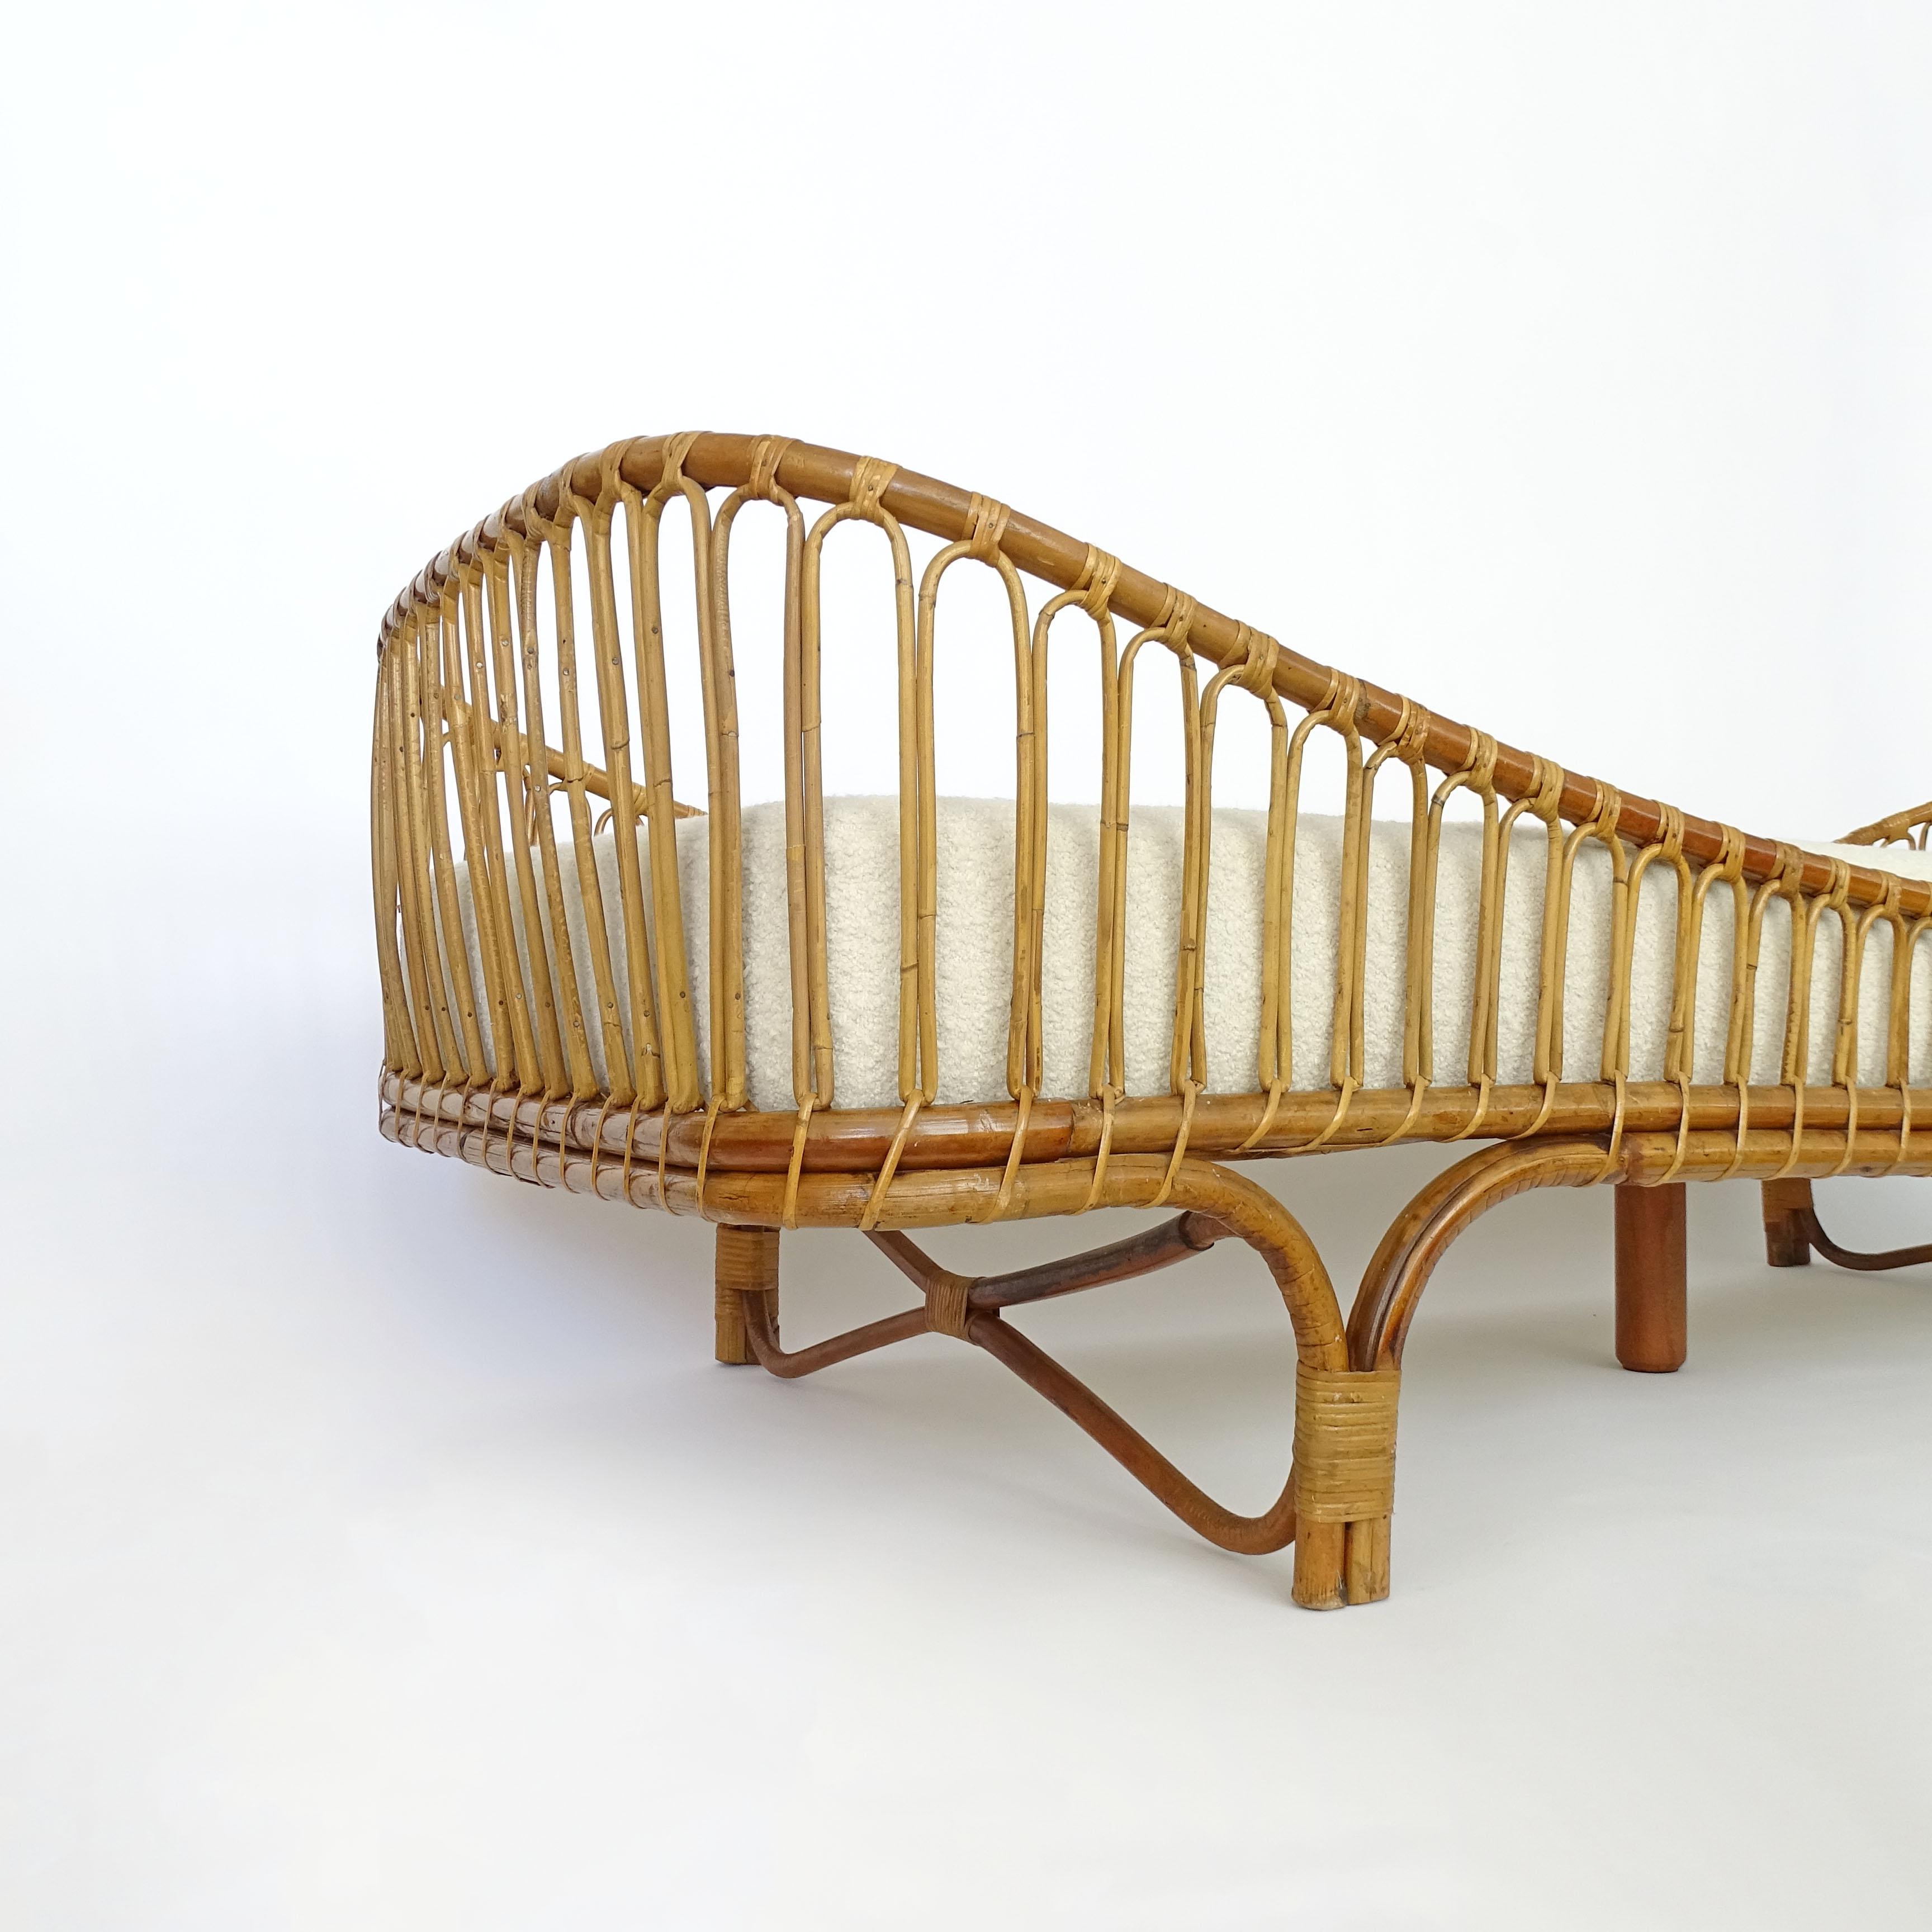 Architect Mario Cristiani Rare Bamboo Daybed for Bonacina, Italy 1964 In Good Condition For Sale In Milan, IT